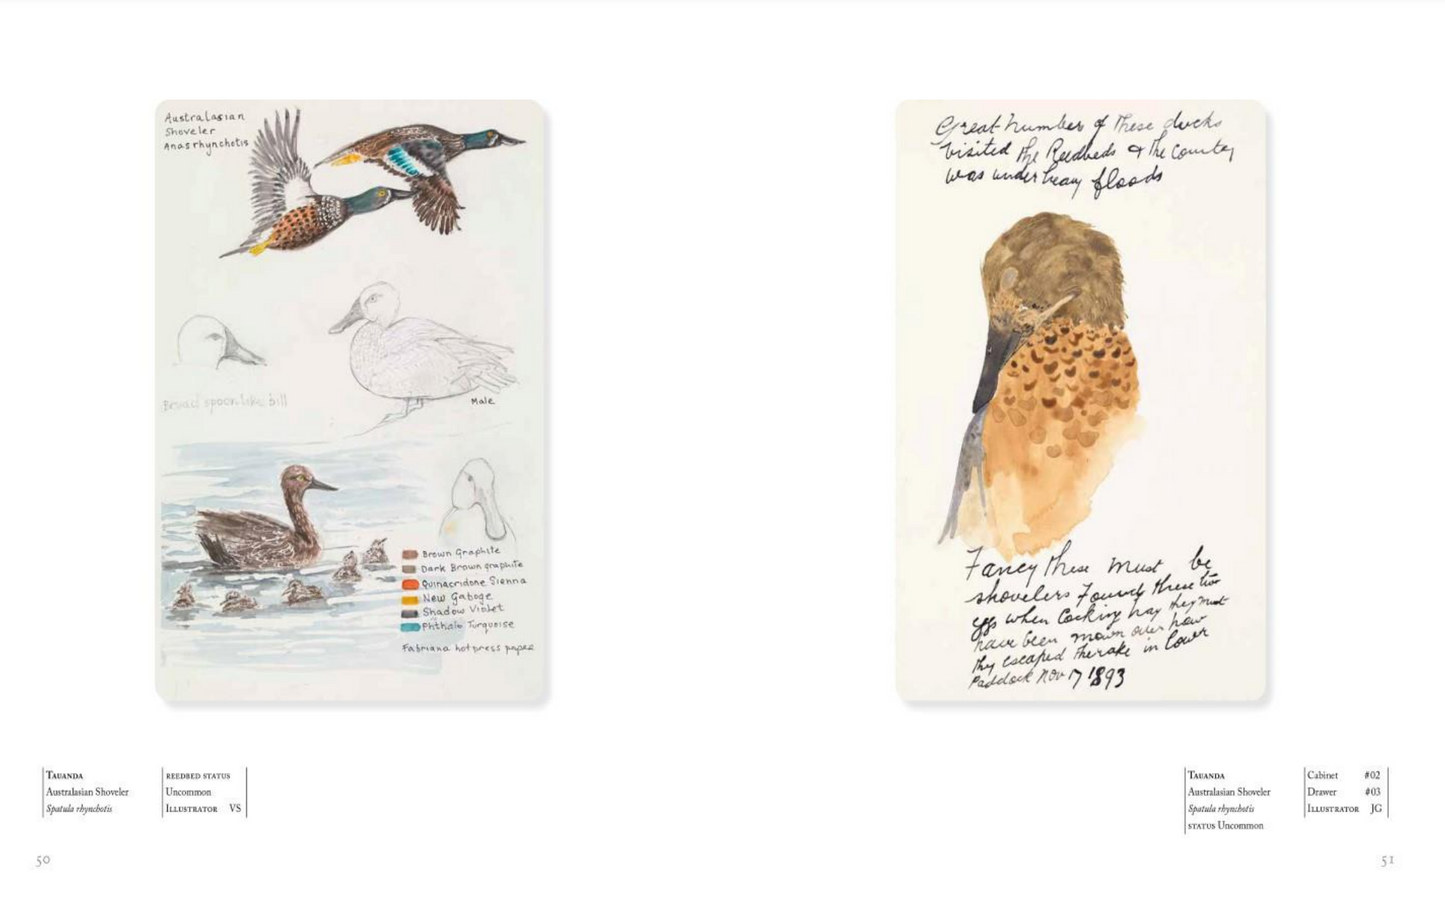 Flight - An illustrated notebook of bird life and loss